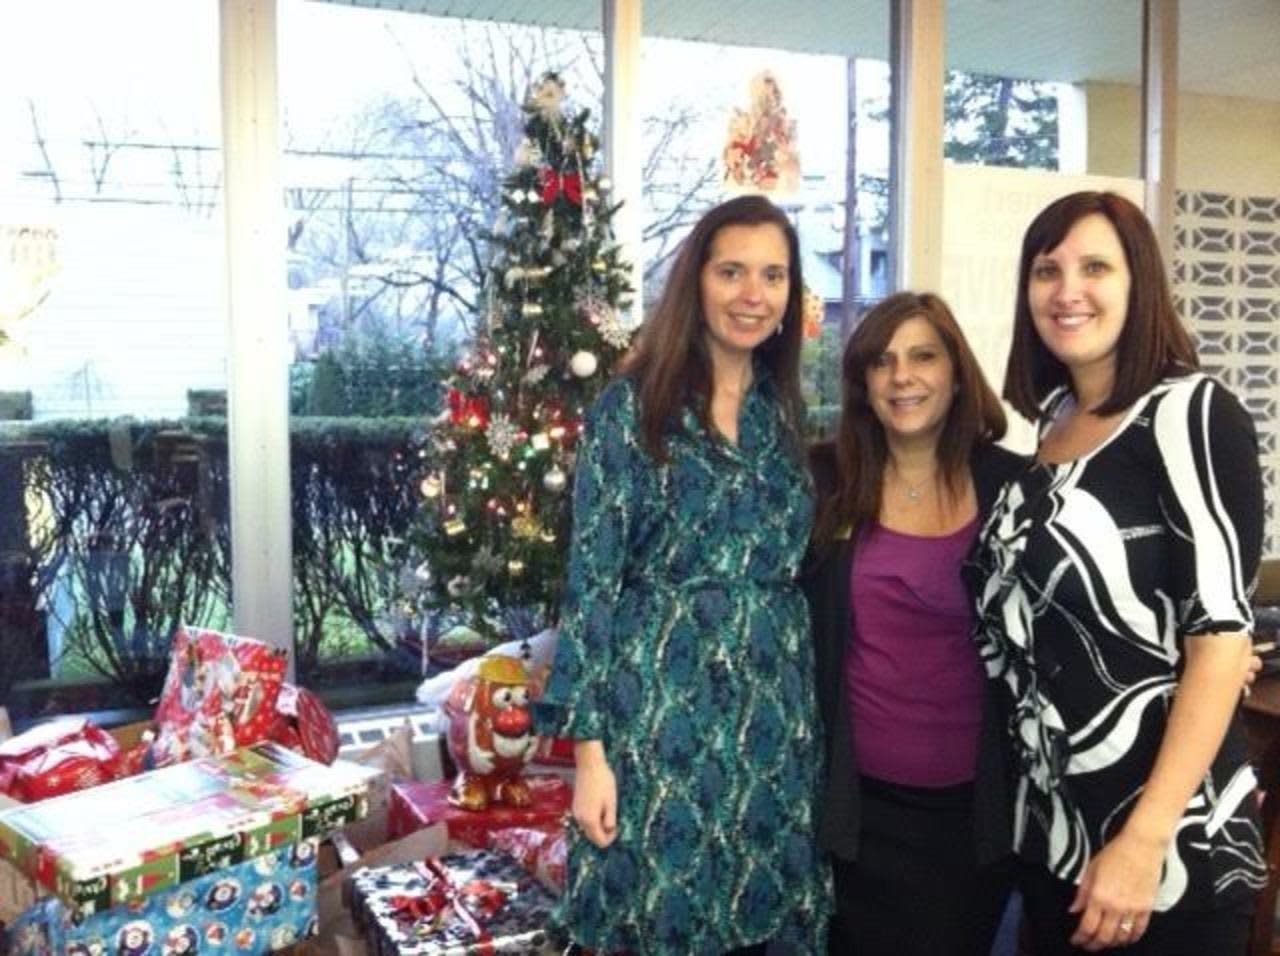 Nicole McQuillen, Susan Devine, and Laura Del Tufo help coordinate this year's toy drive in Fair Lawn.